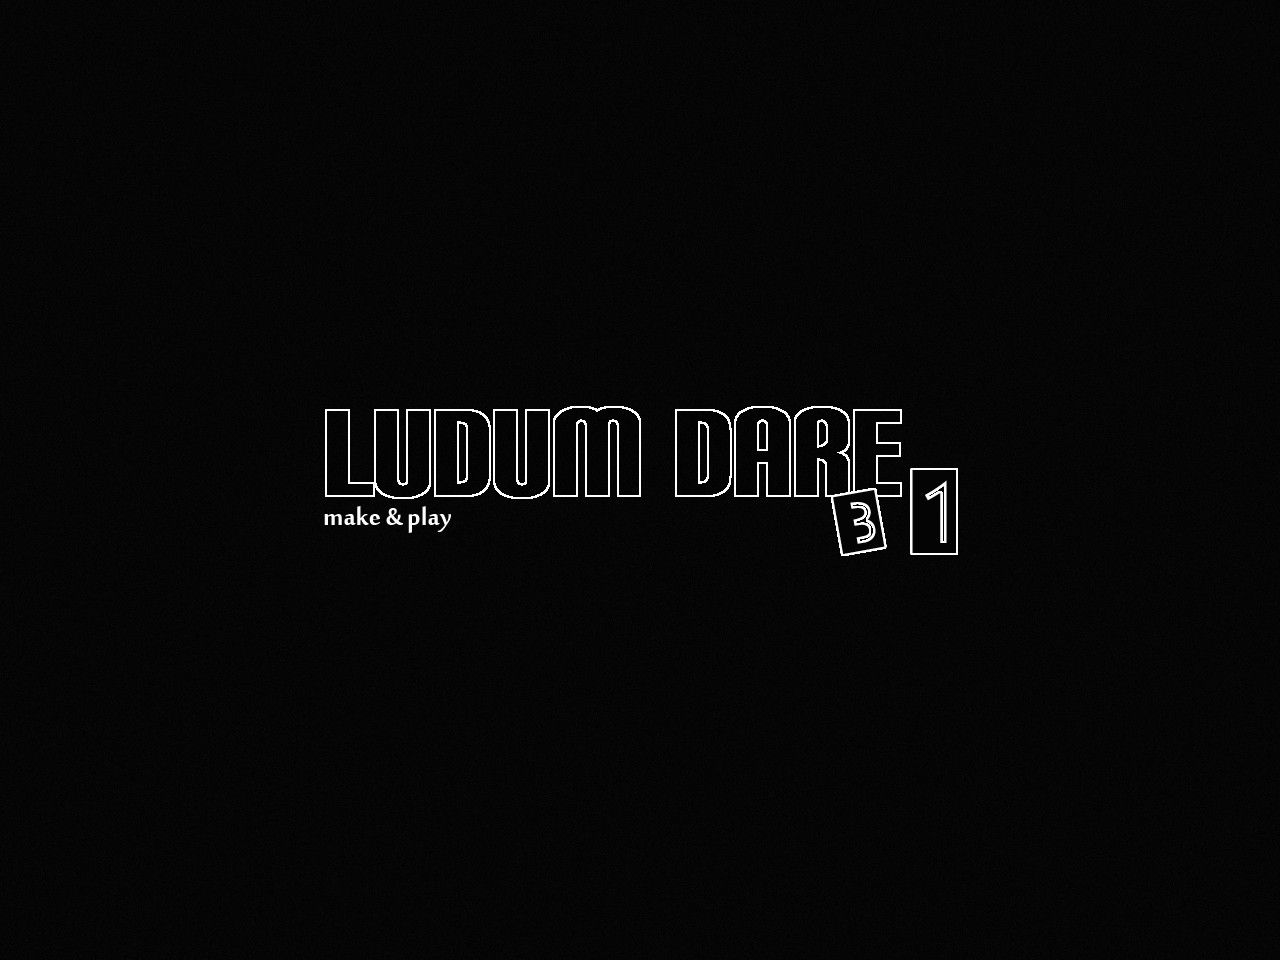 Another wallpaper, getting fed up yet Ludum Dare